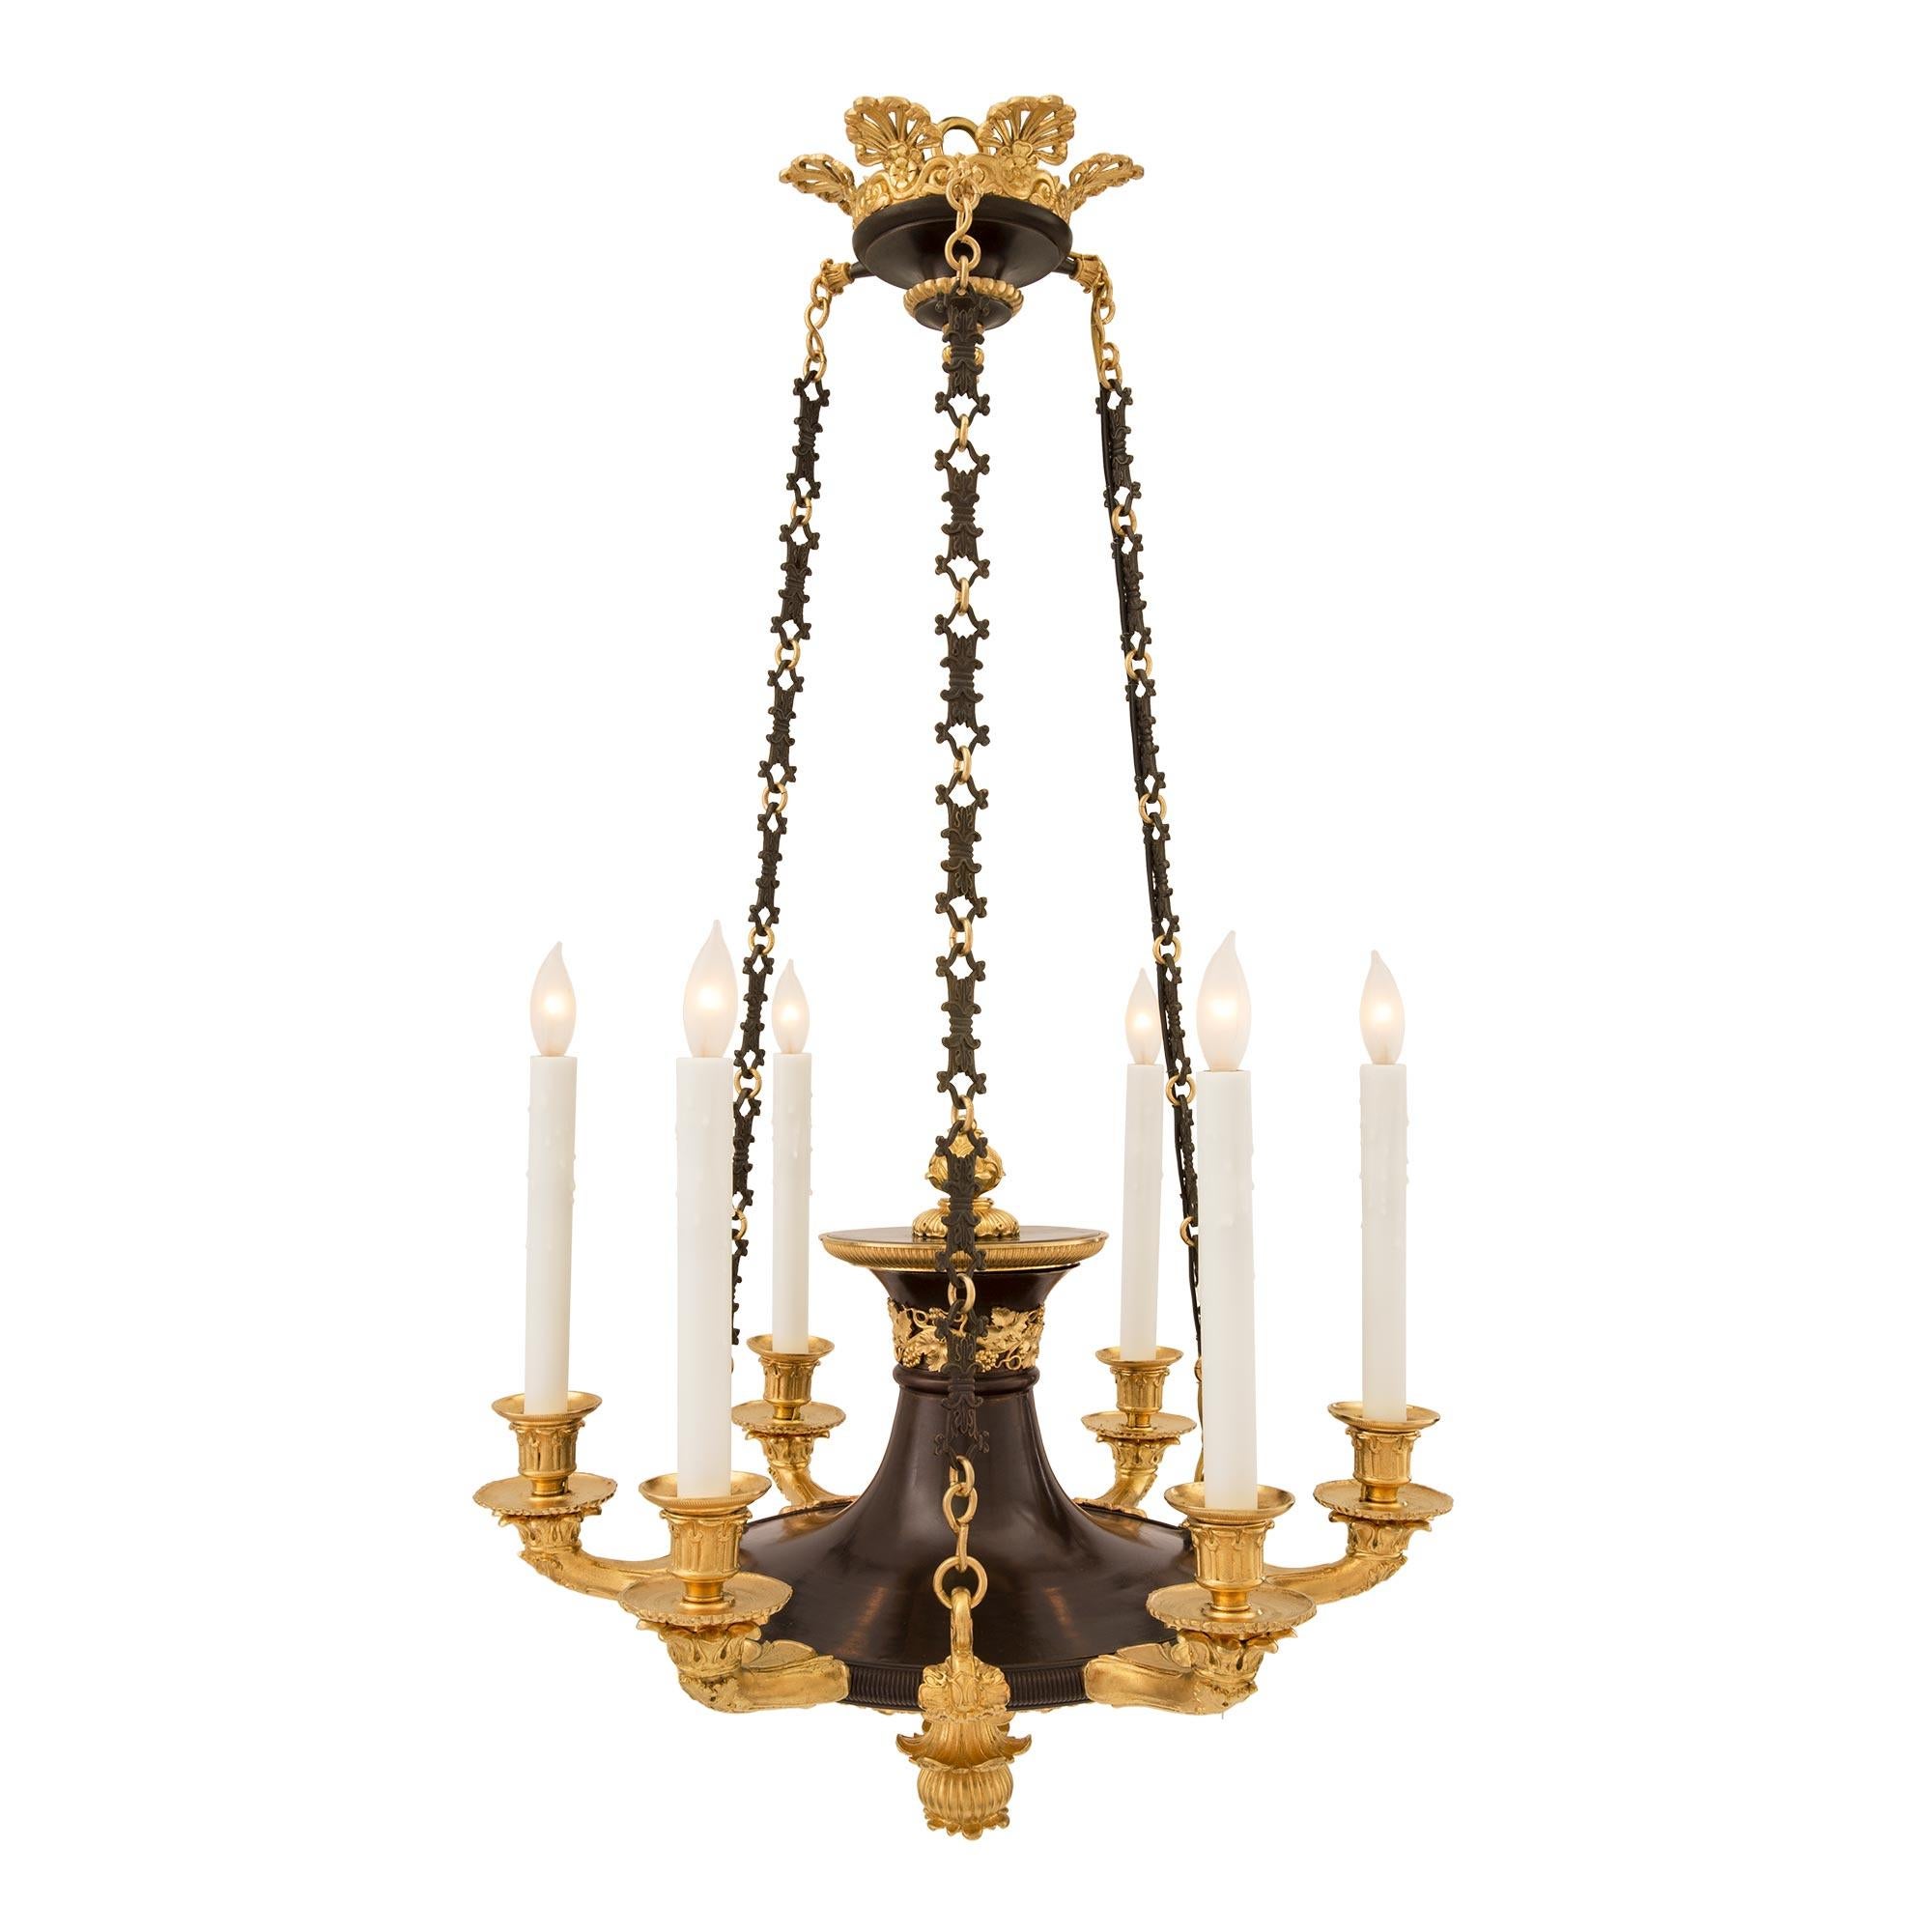 A handsome French 19th century Empire st. patinated bronze and ormolu six arm chandelier. The chandelier is centered by a richly chased ormolu bottom finial amidst decorative foliate designs. The elegantly curved patinated bronze body displays an